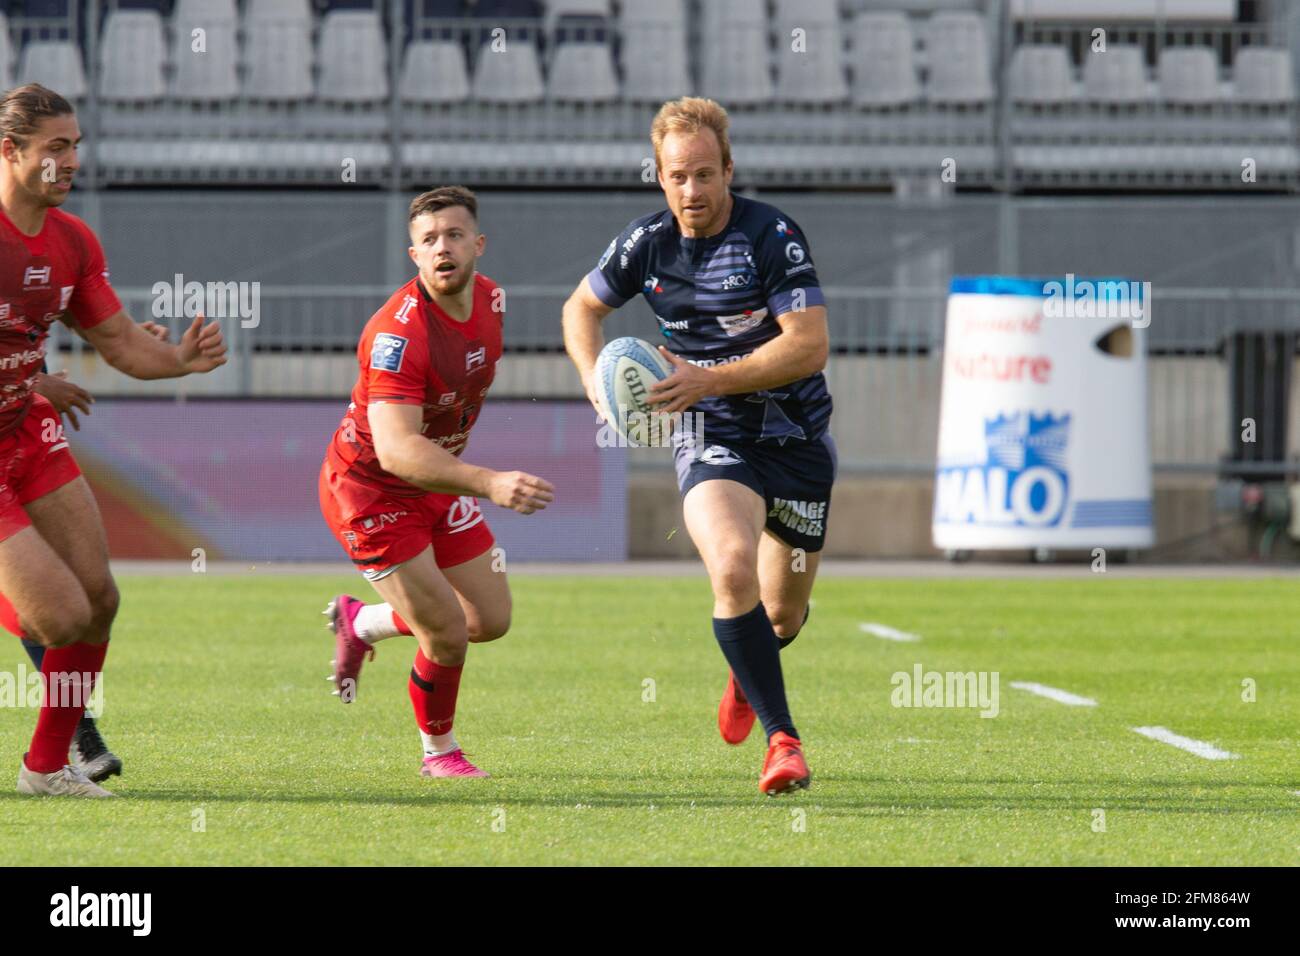 Nick Abendanon Of Vannes Runs To Score A Try During The French Championship Pro D2 Rugby Union Match Between Rc Vannes And Oyonnax Rugby On May 6 2021 At La Rabine Stadium